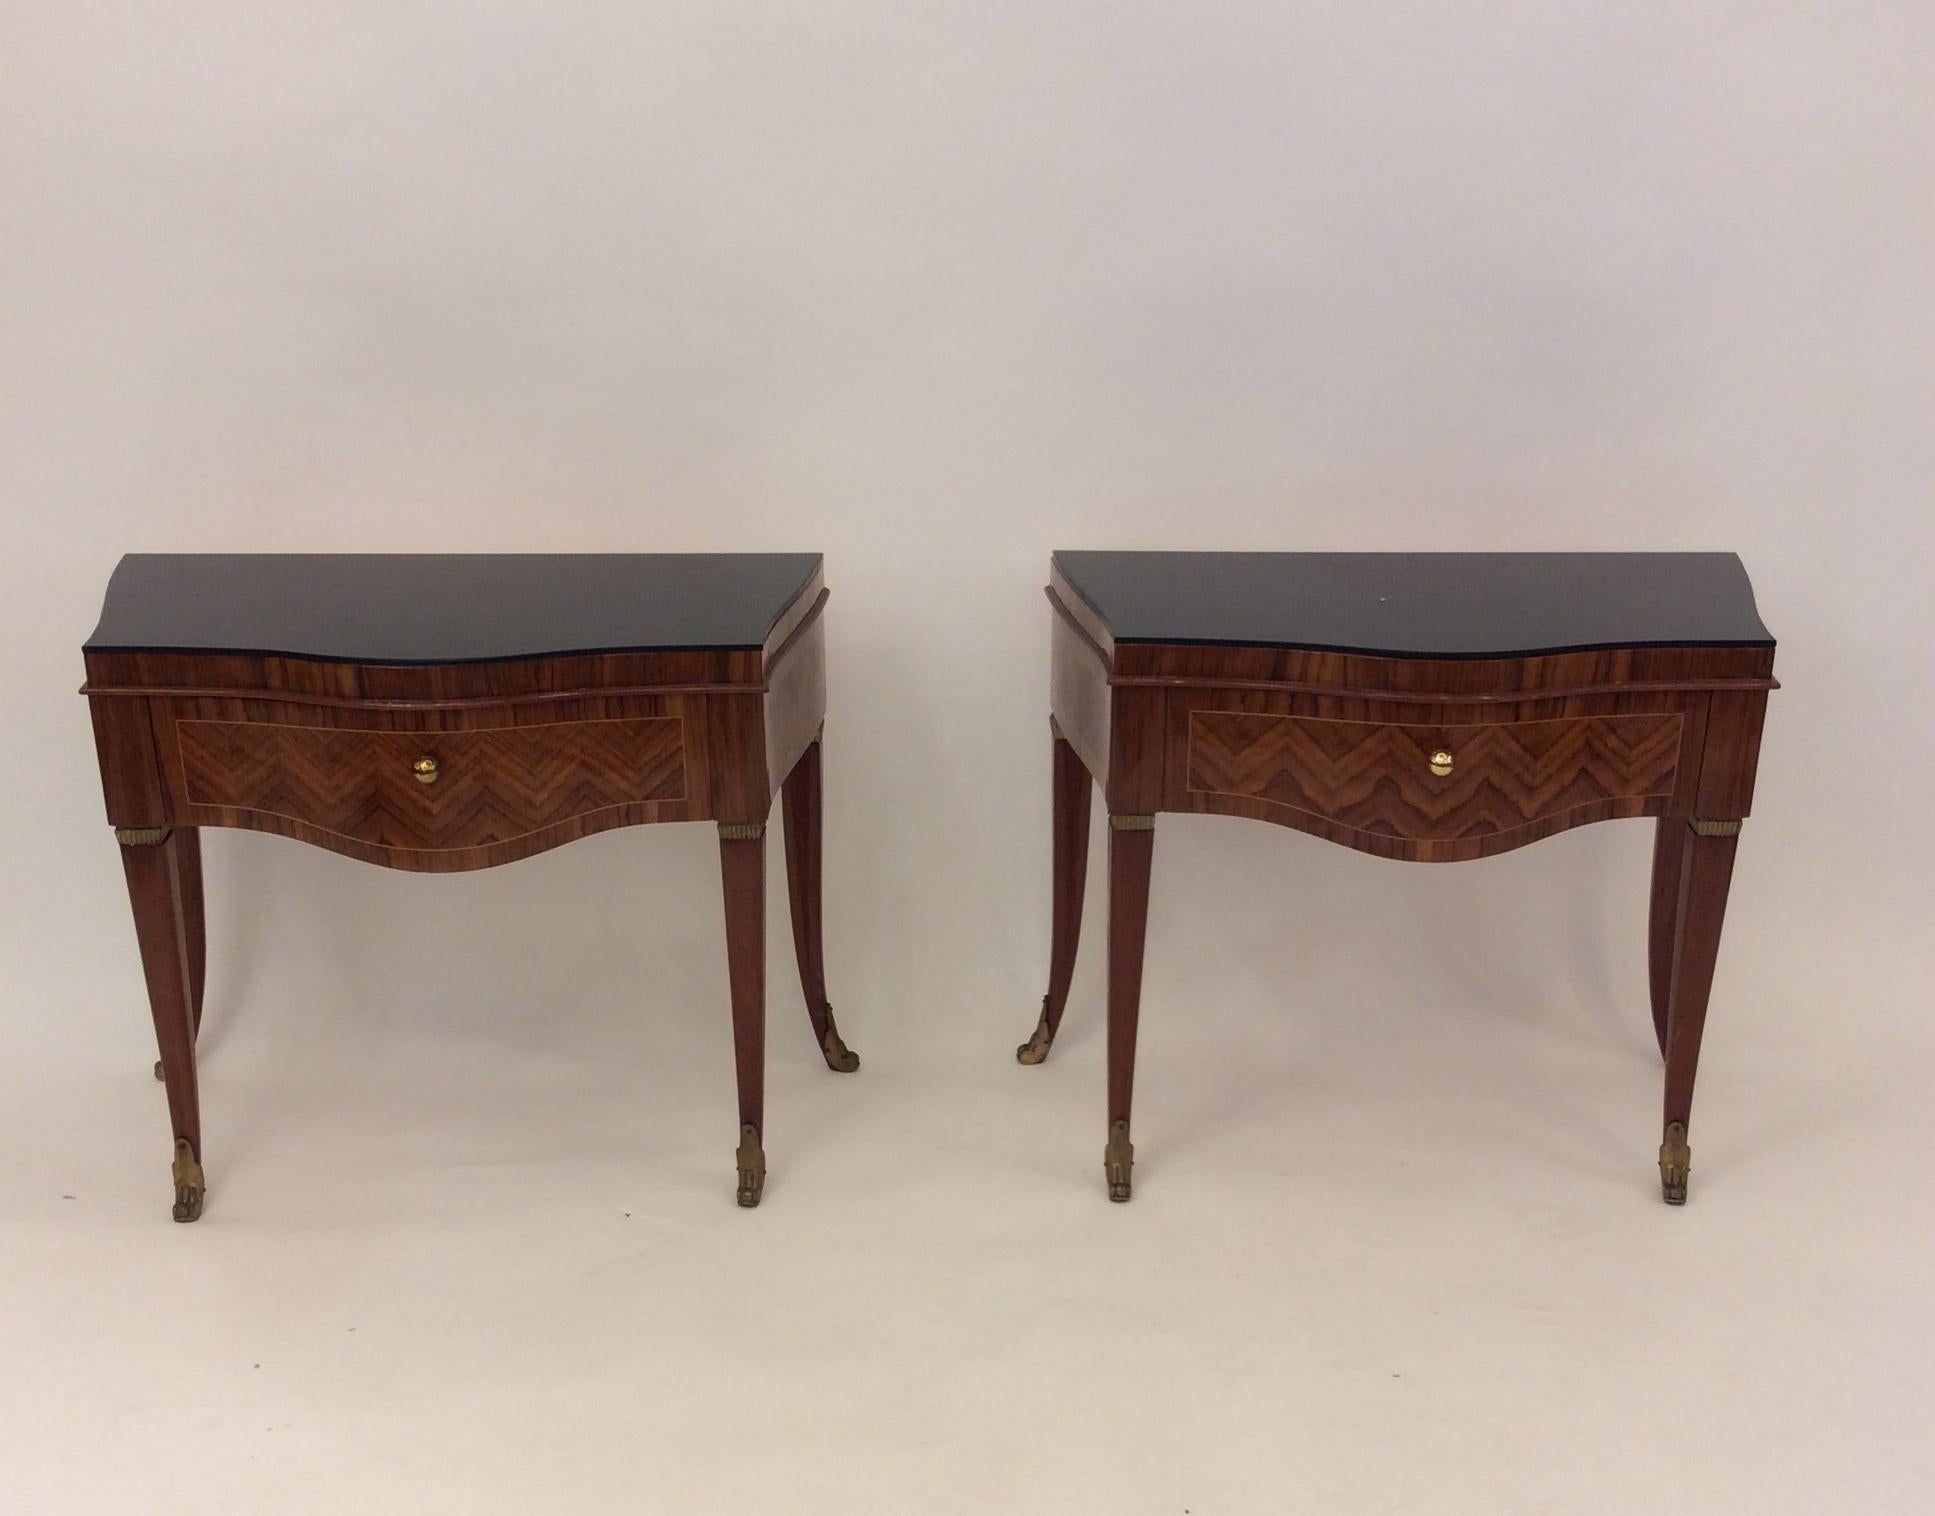 An outstanding pair of hand crafted side tables with drawers, fantastic marquetry made of mahogany, walnut and a mix of  woods. 
Black glass top, brass shoes at the final of the legs.
Attributed to Gio Ponti.